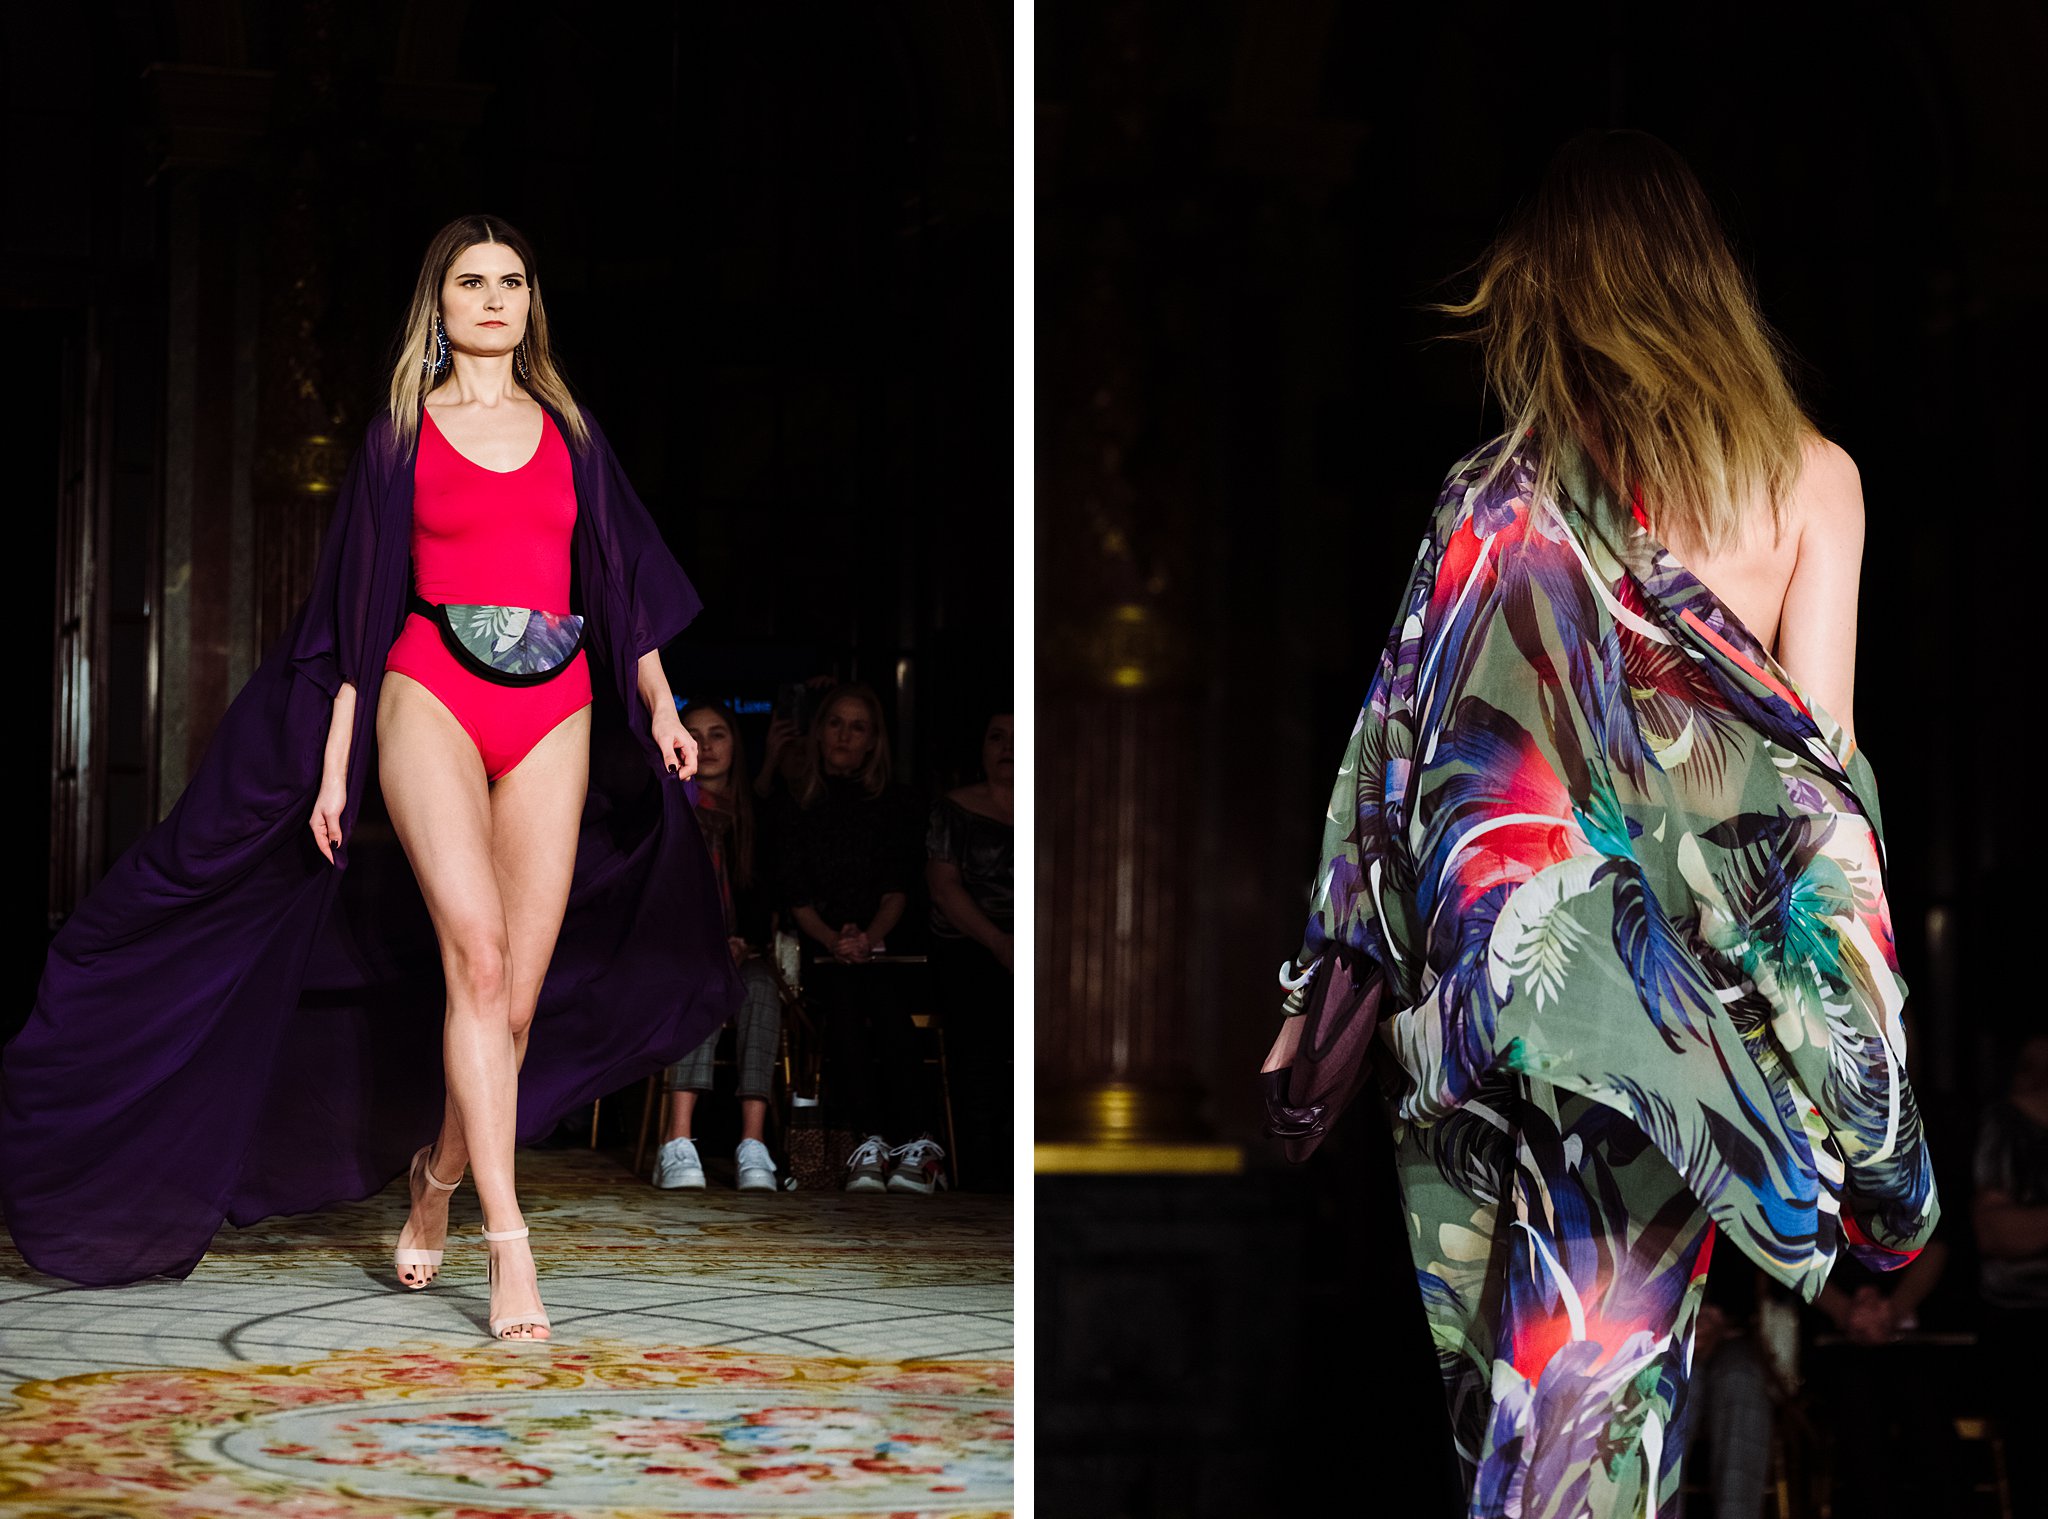 I Am So Kate Luxe - Runway Photography from the Oxford Fashion Studios show at Paris Fashion Week, Autumn-Winter 2020